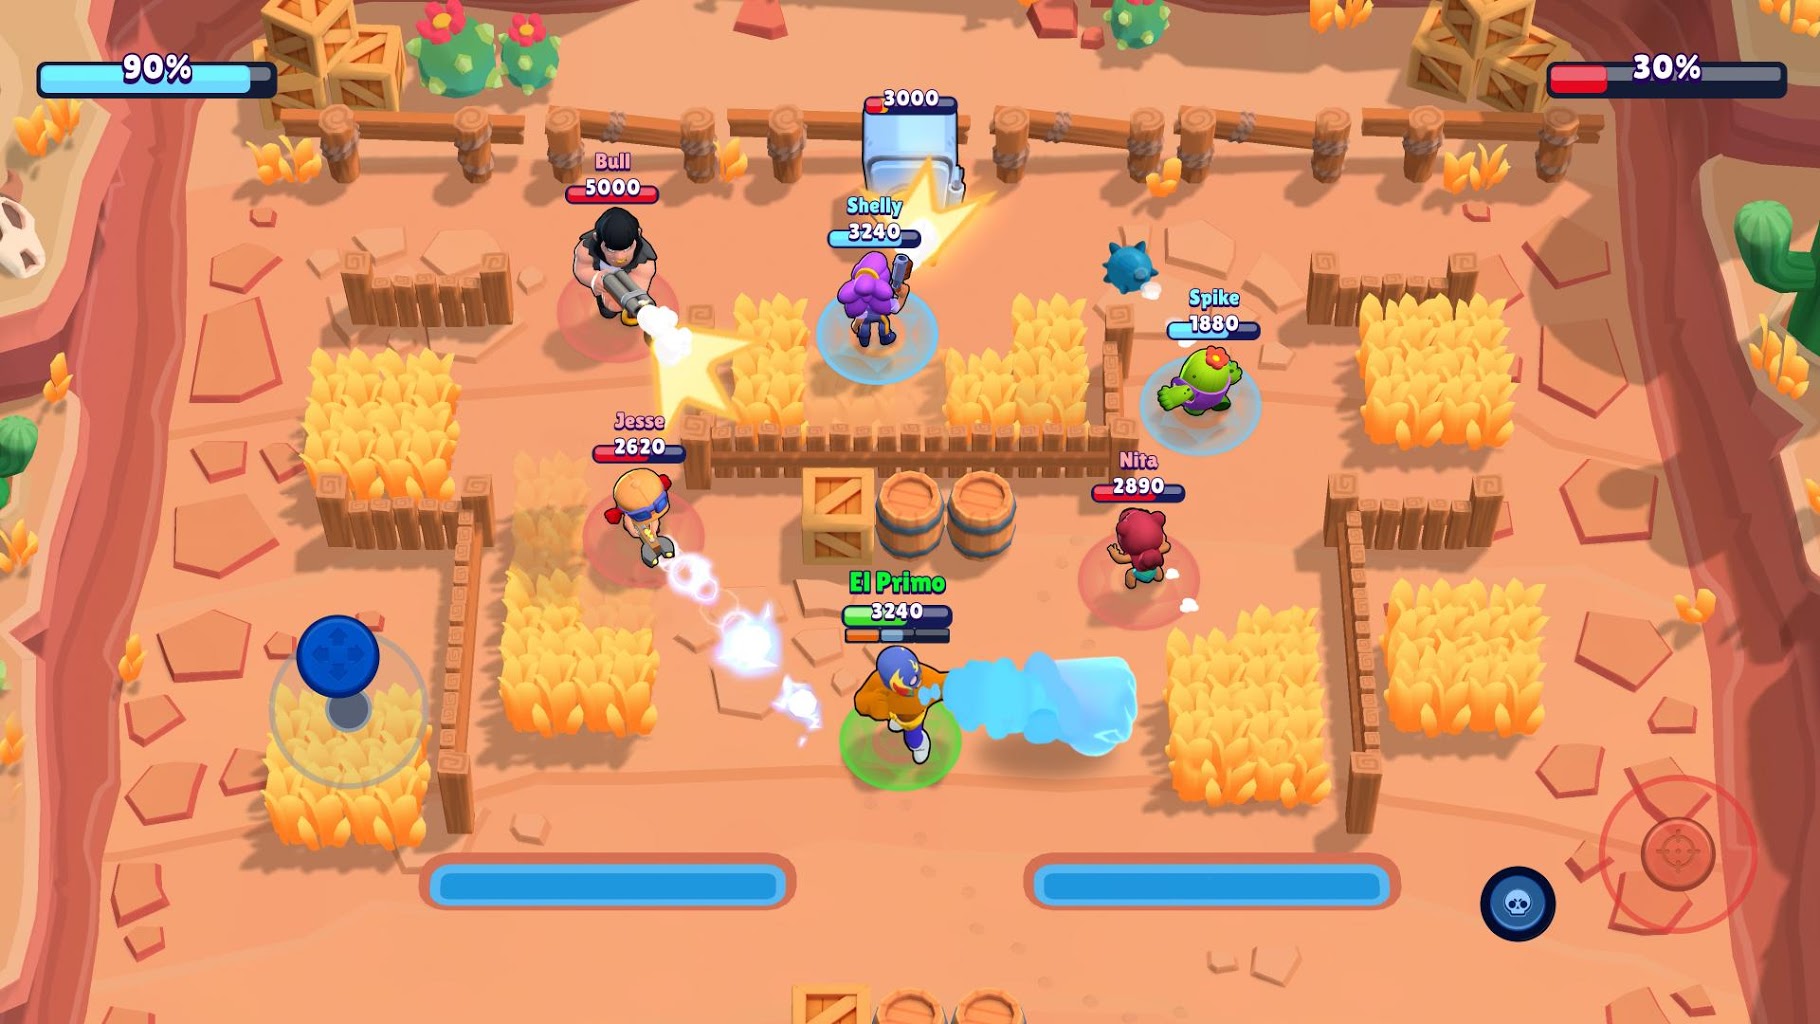 Download Brawl Stars 36 270 Apk Mod Money For Android - apkpure brawl stars android